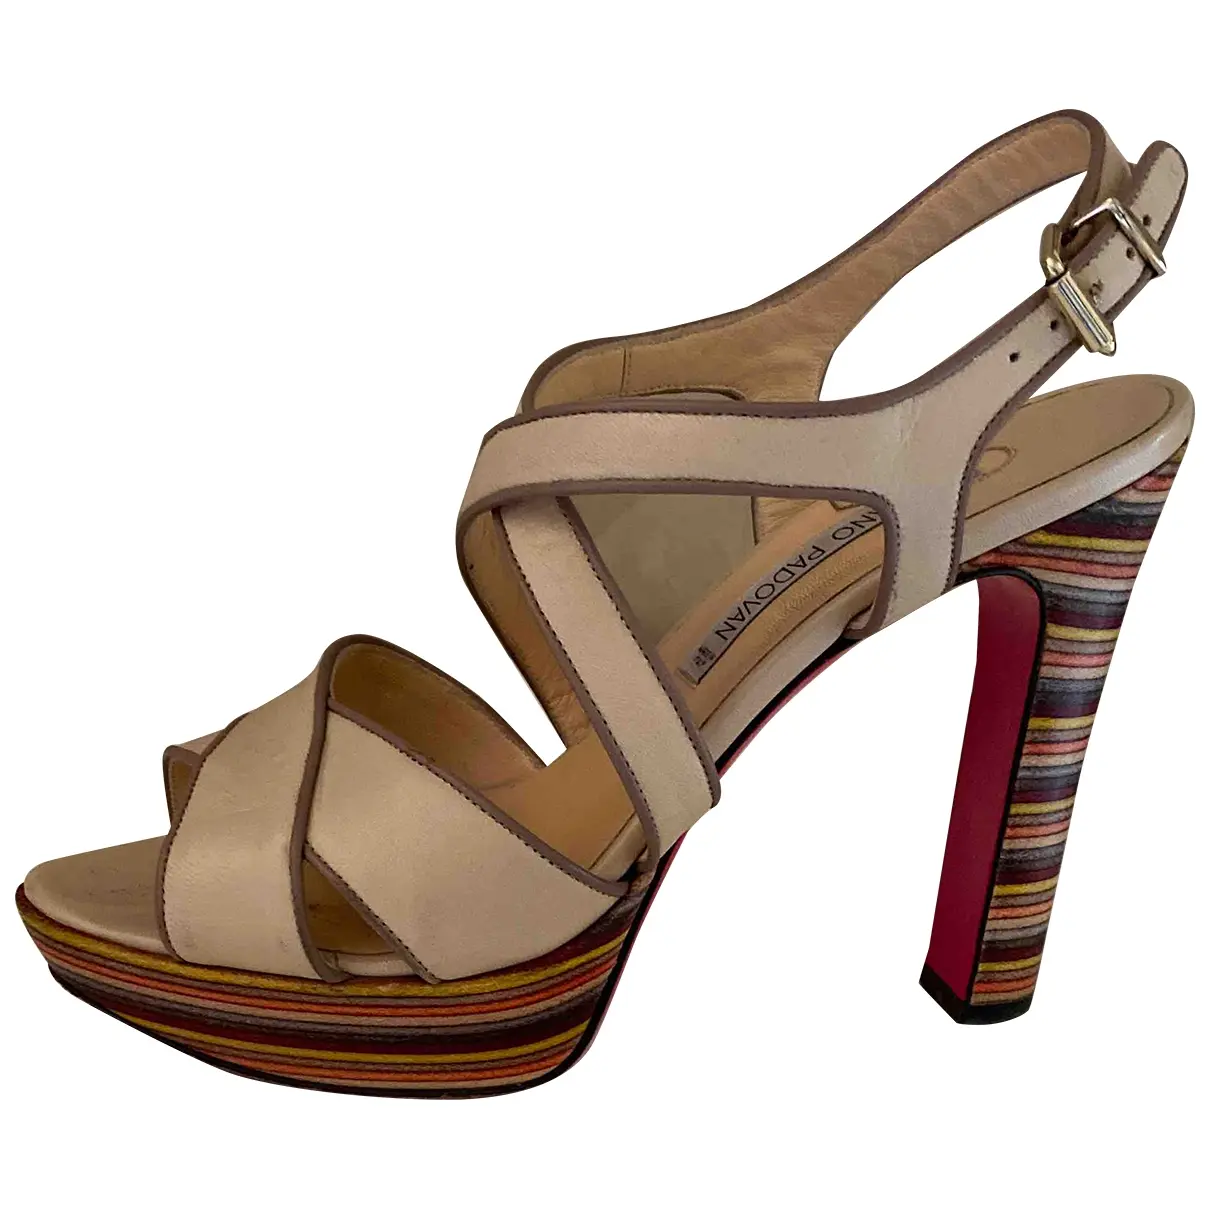 Leather sandals Luciano Padovan